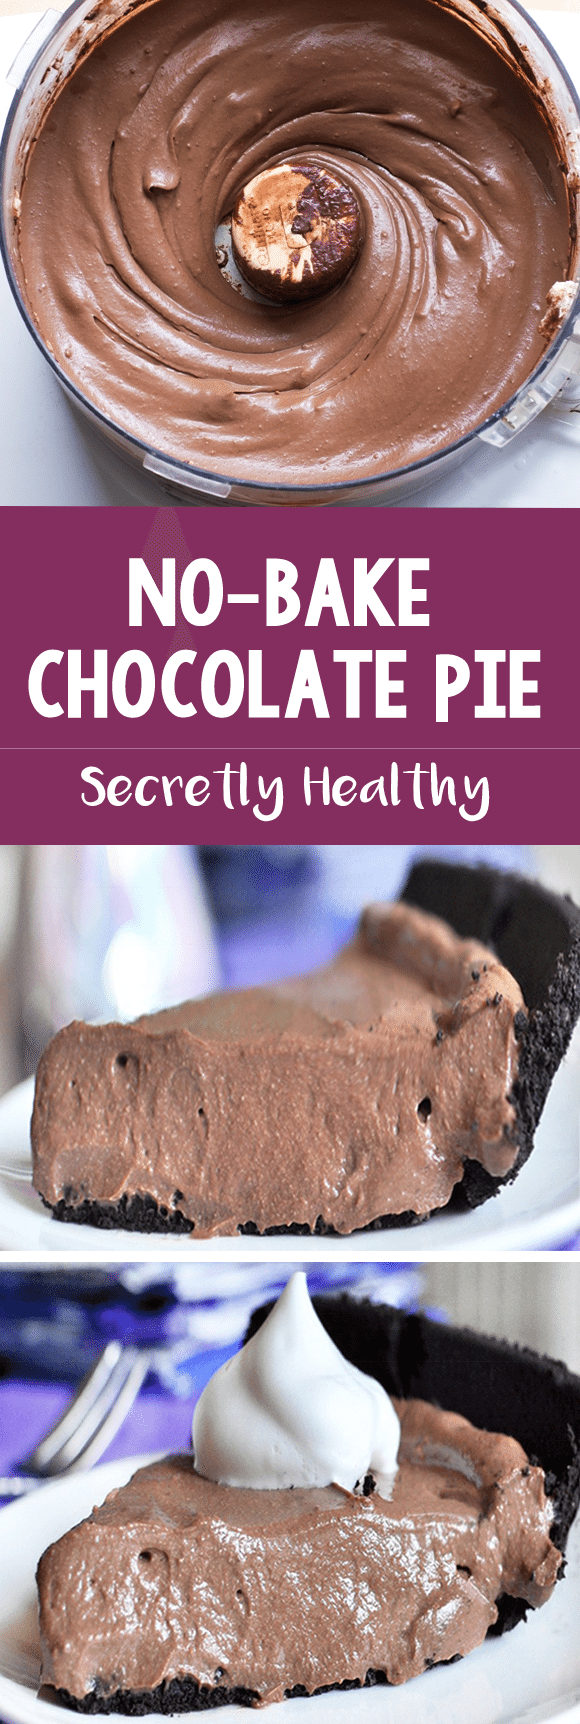 With fewer than 150 calories per slice, this creamy chocolate pie is a chocolate lover's dream come true! @choccoveredkt